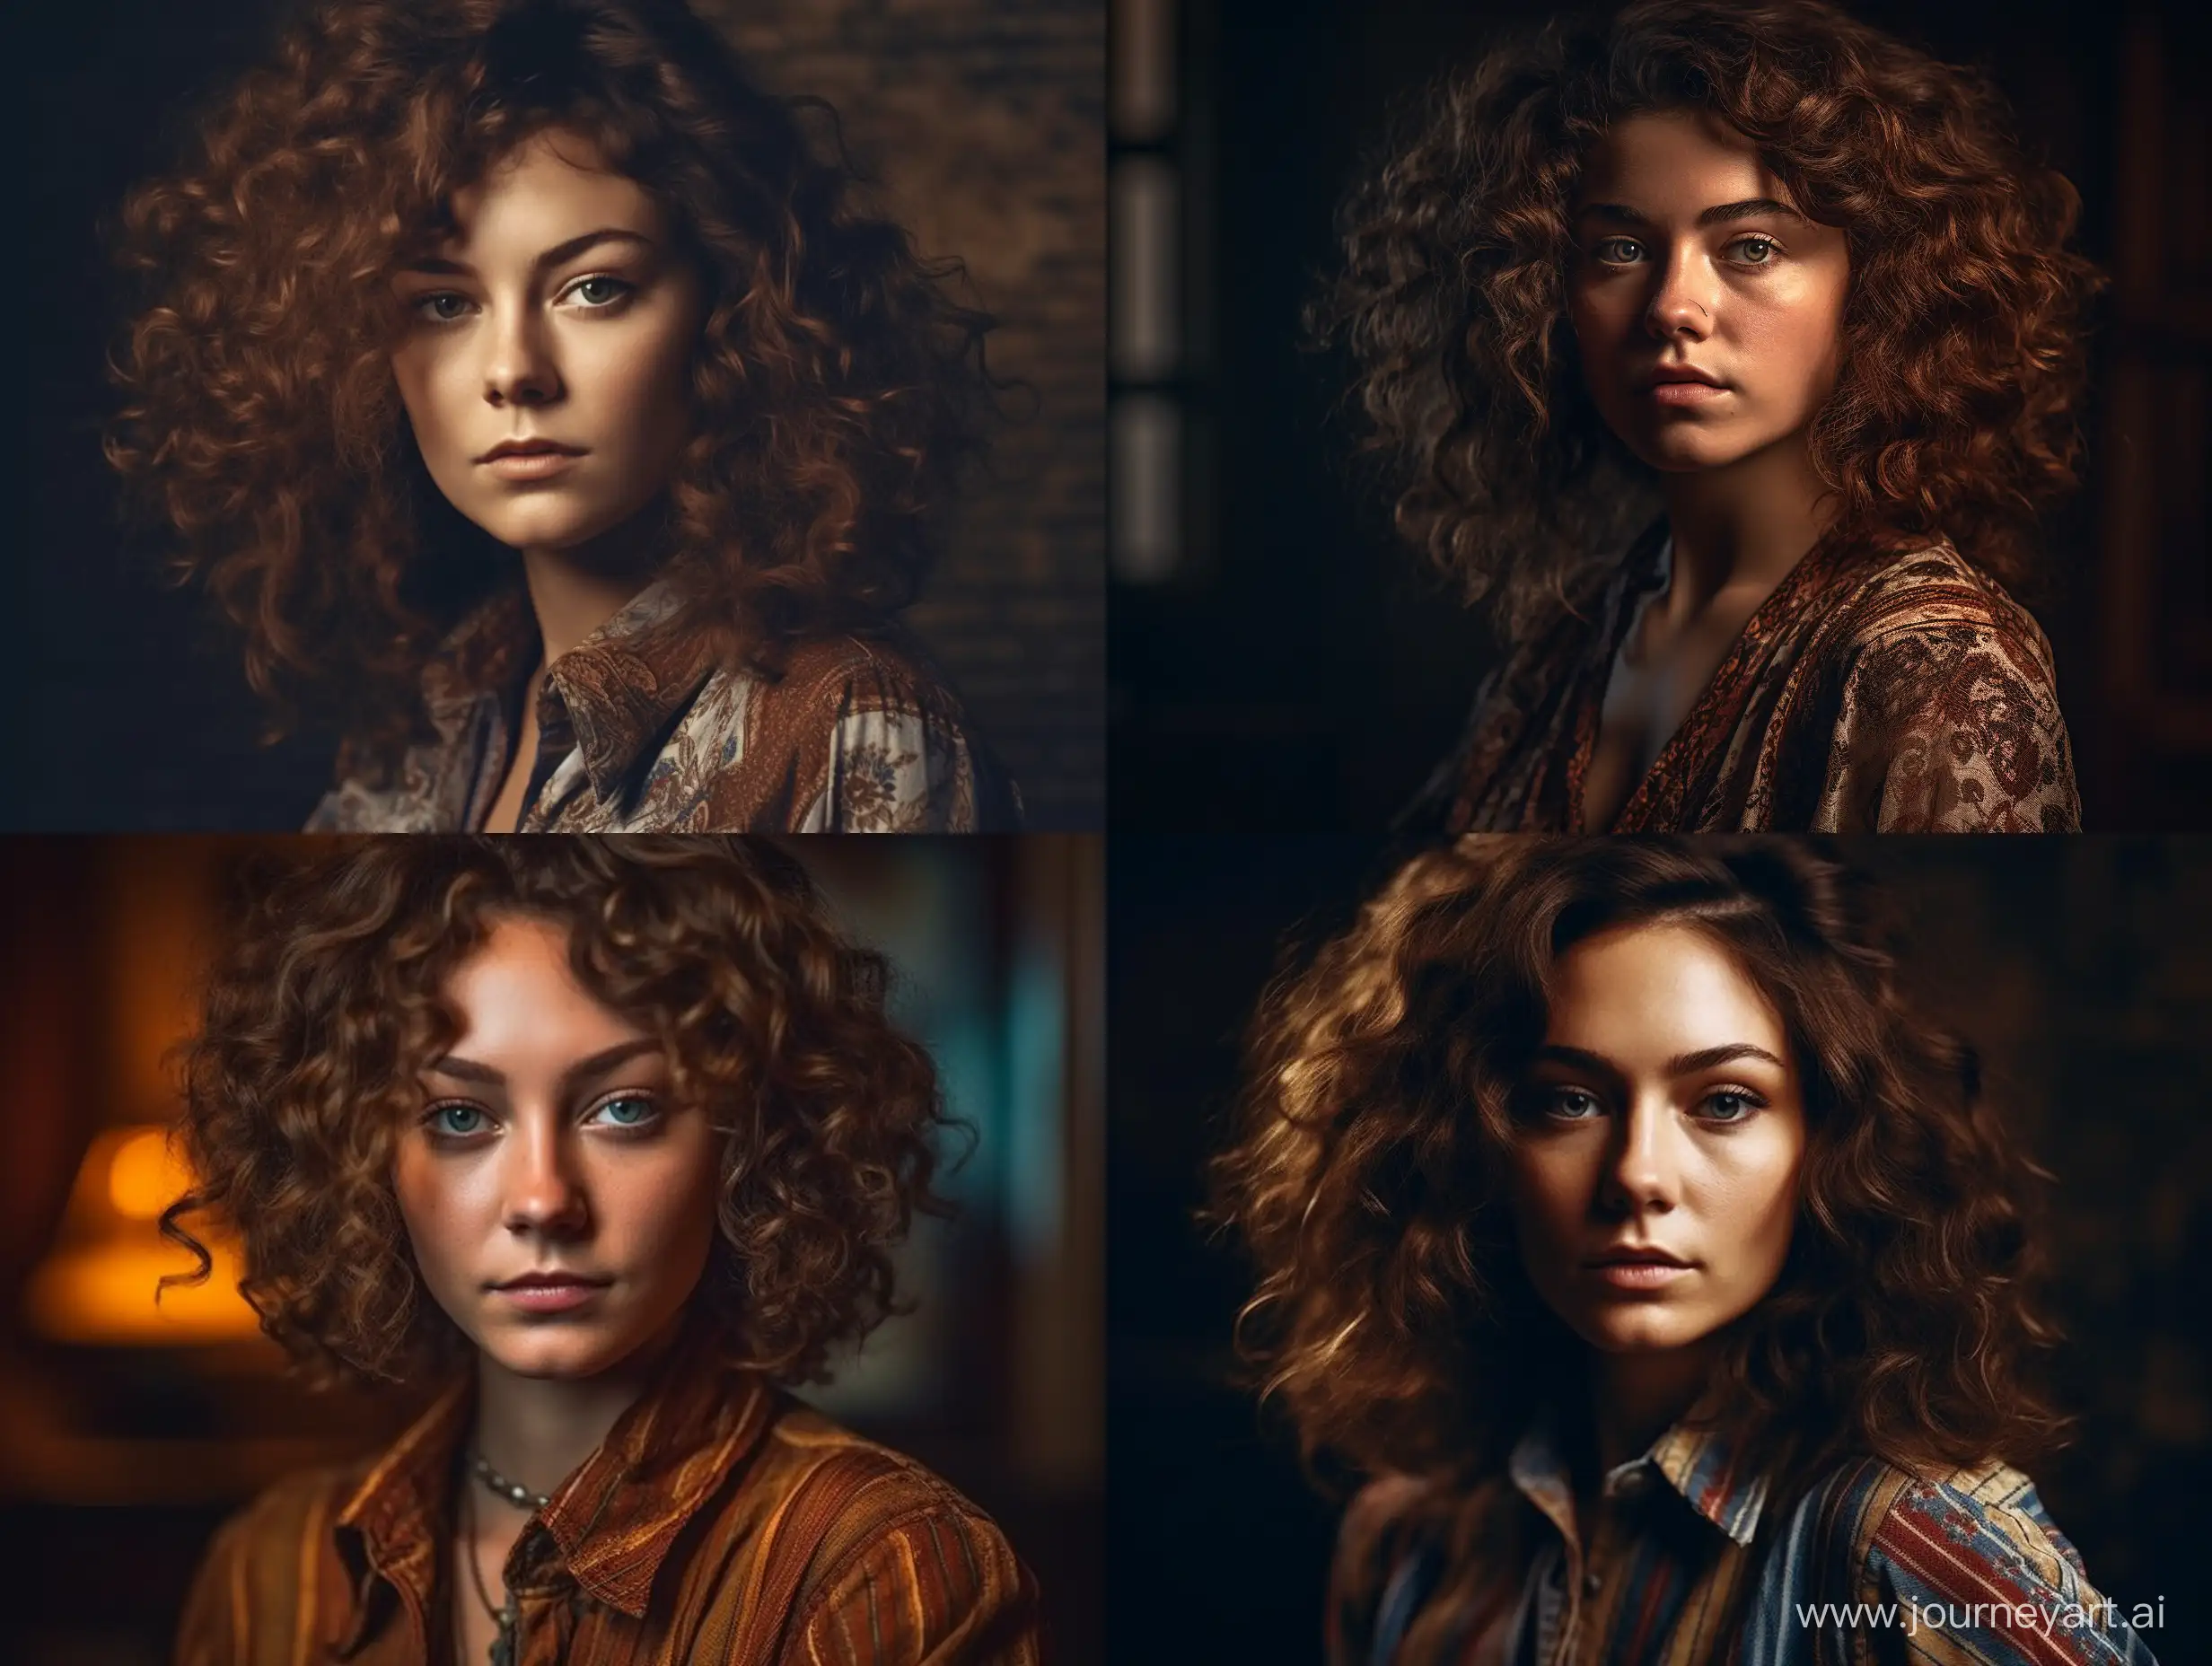 Captivating-70s-Vintage-Portrait-Woman-with-Curly-Hair-in-Antique-Atmosphere